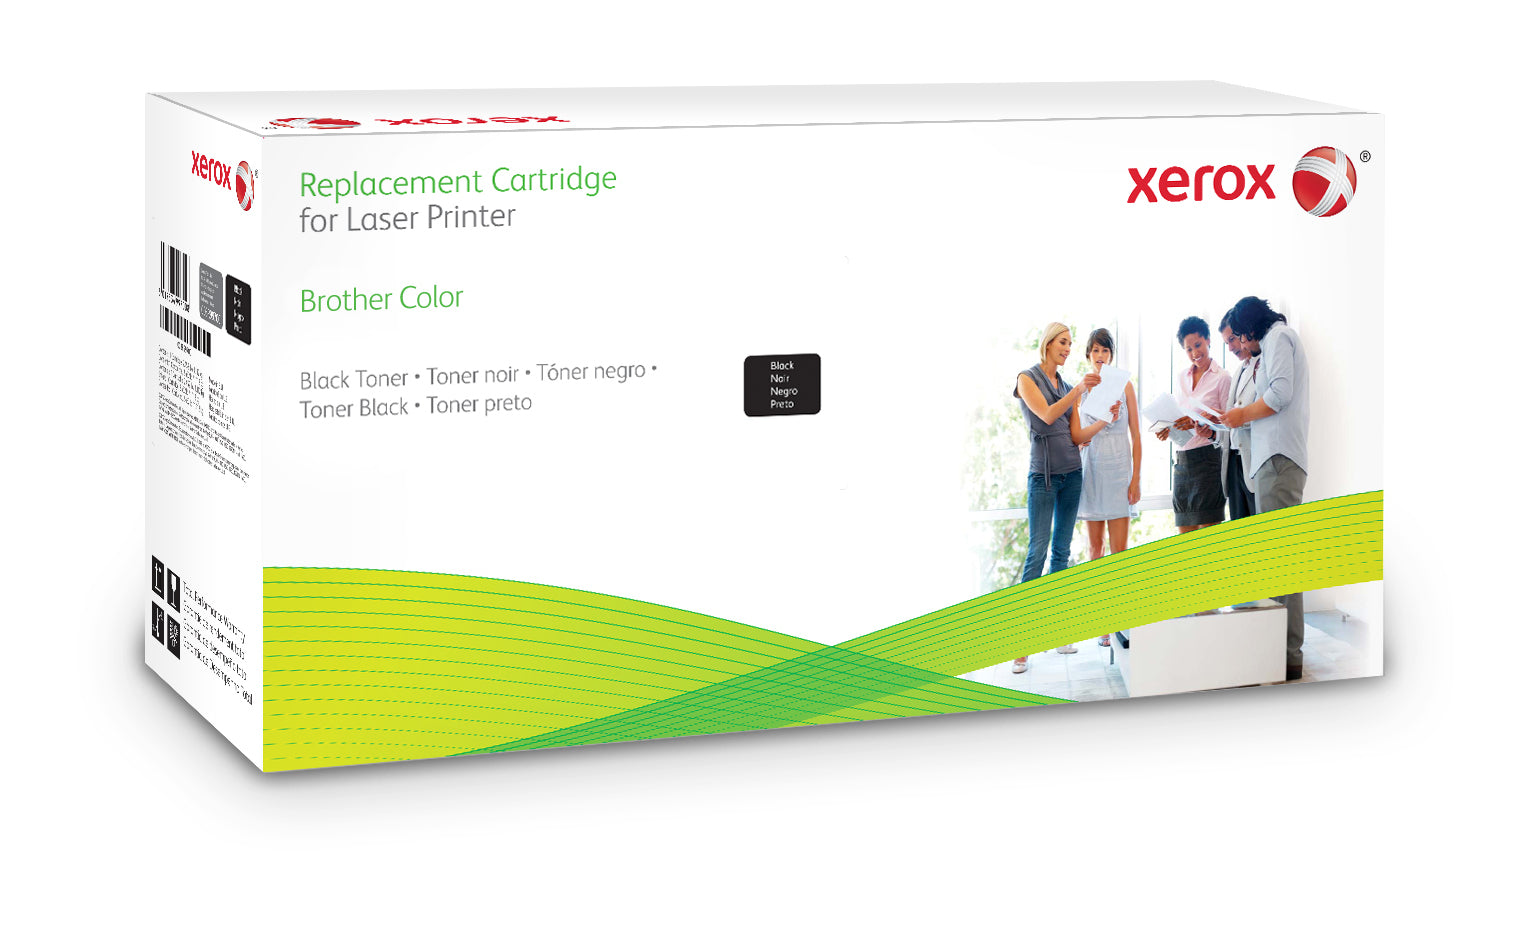 Xerox 006R03330 Toner-kit, 2.6K pages (replaces Brother TN2320) for Brother HL-L 2300